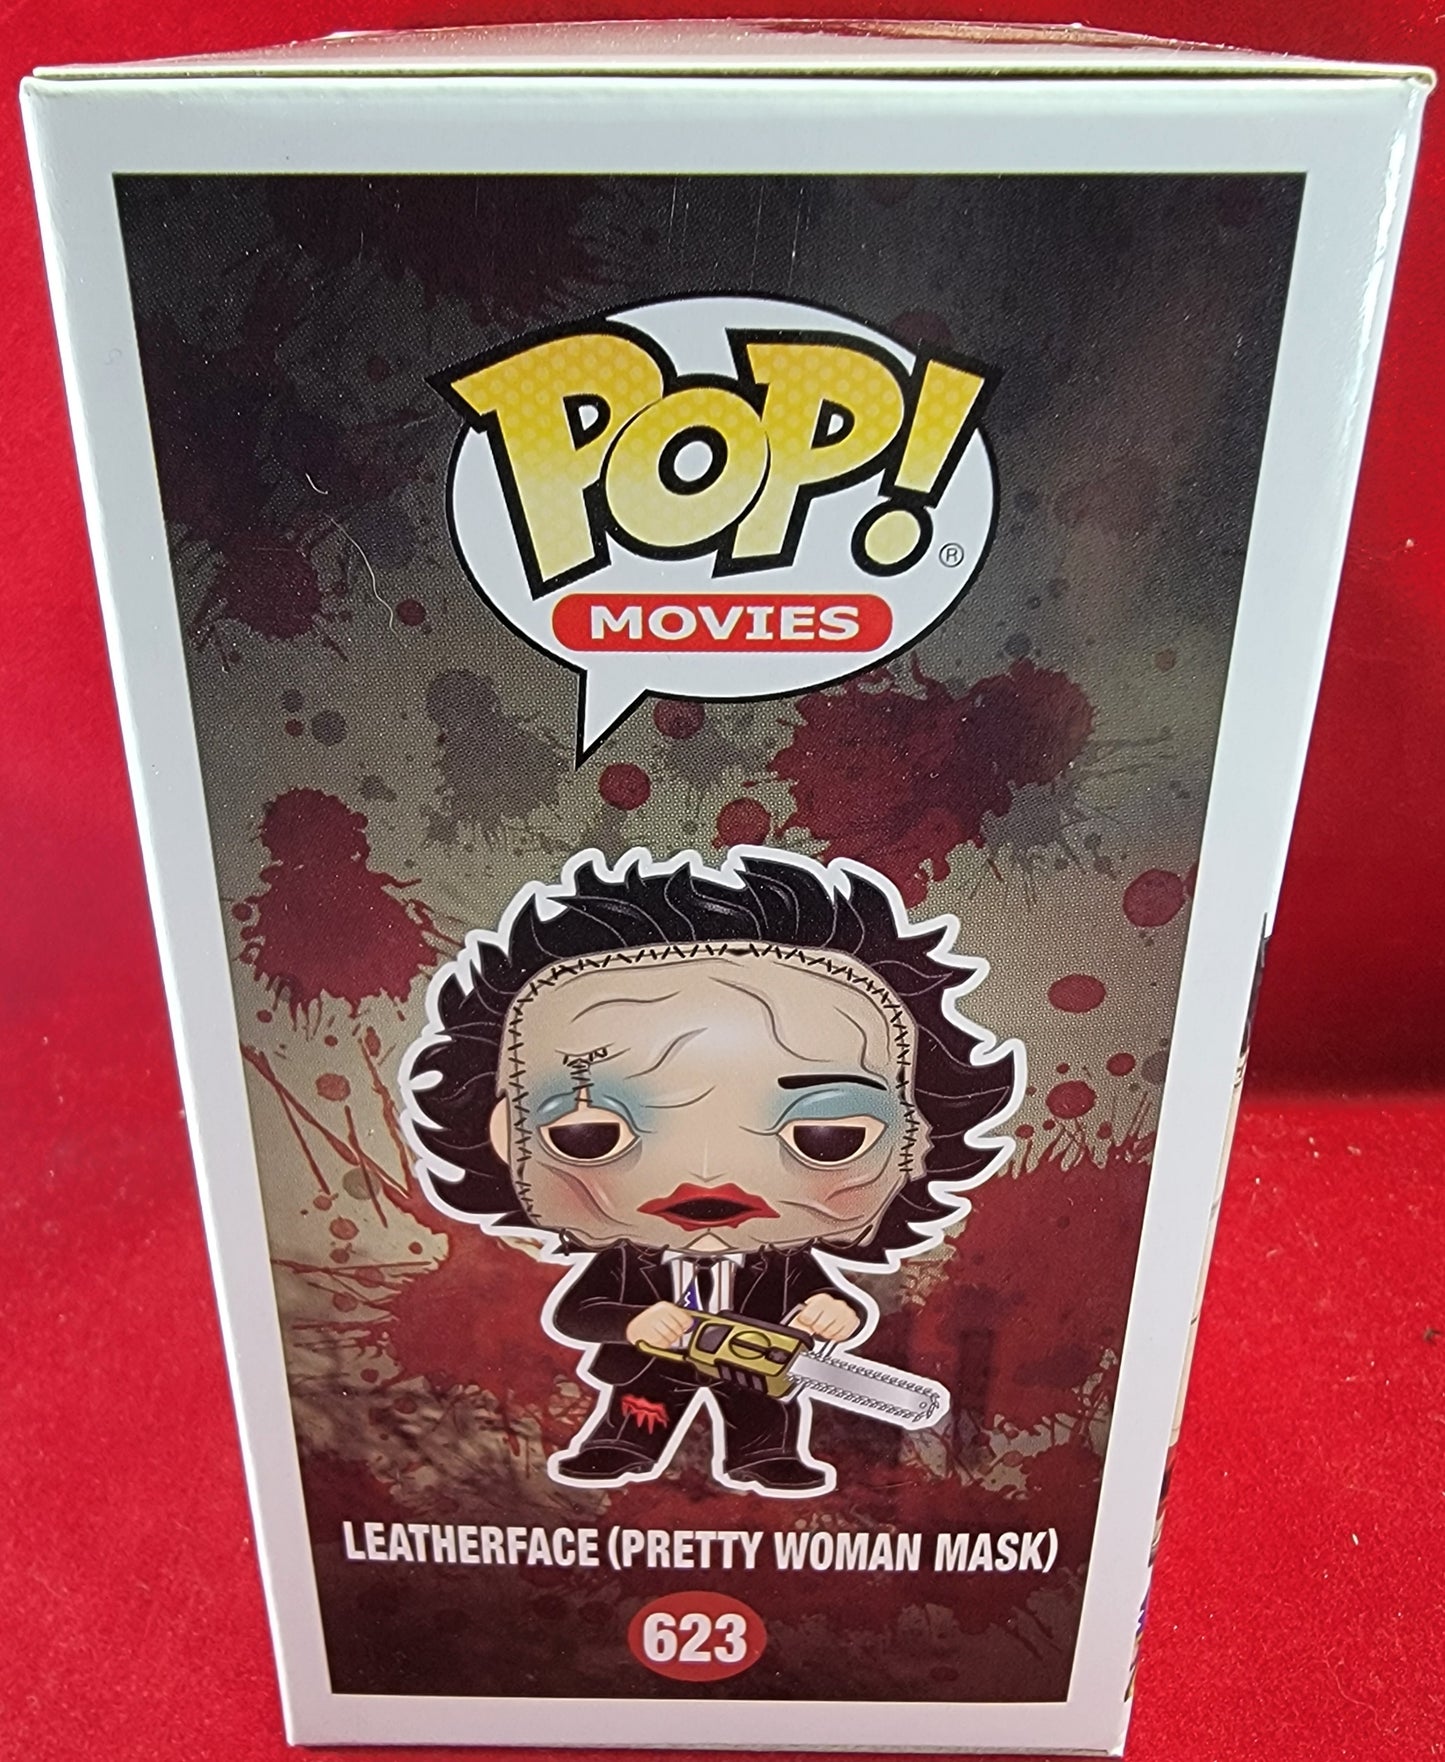 Leatherface (pretty woman mask)hot topic exclusive #623 (nib)
With pop protector